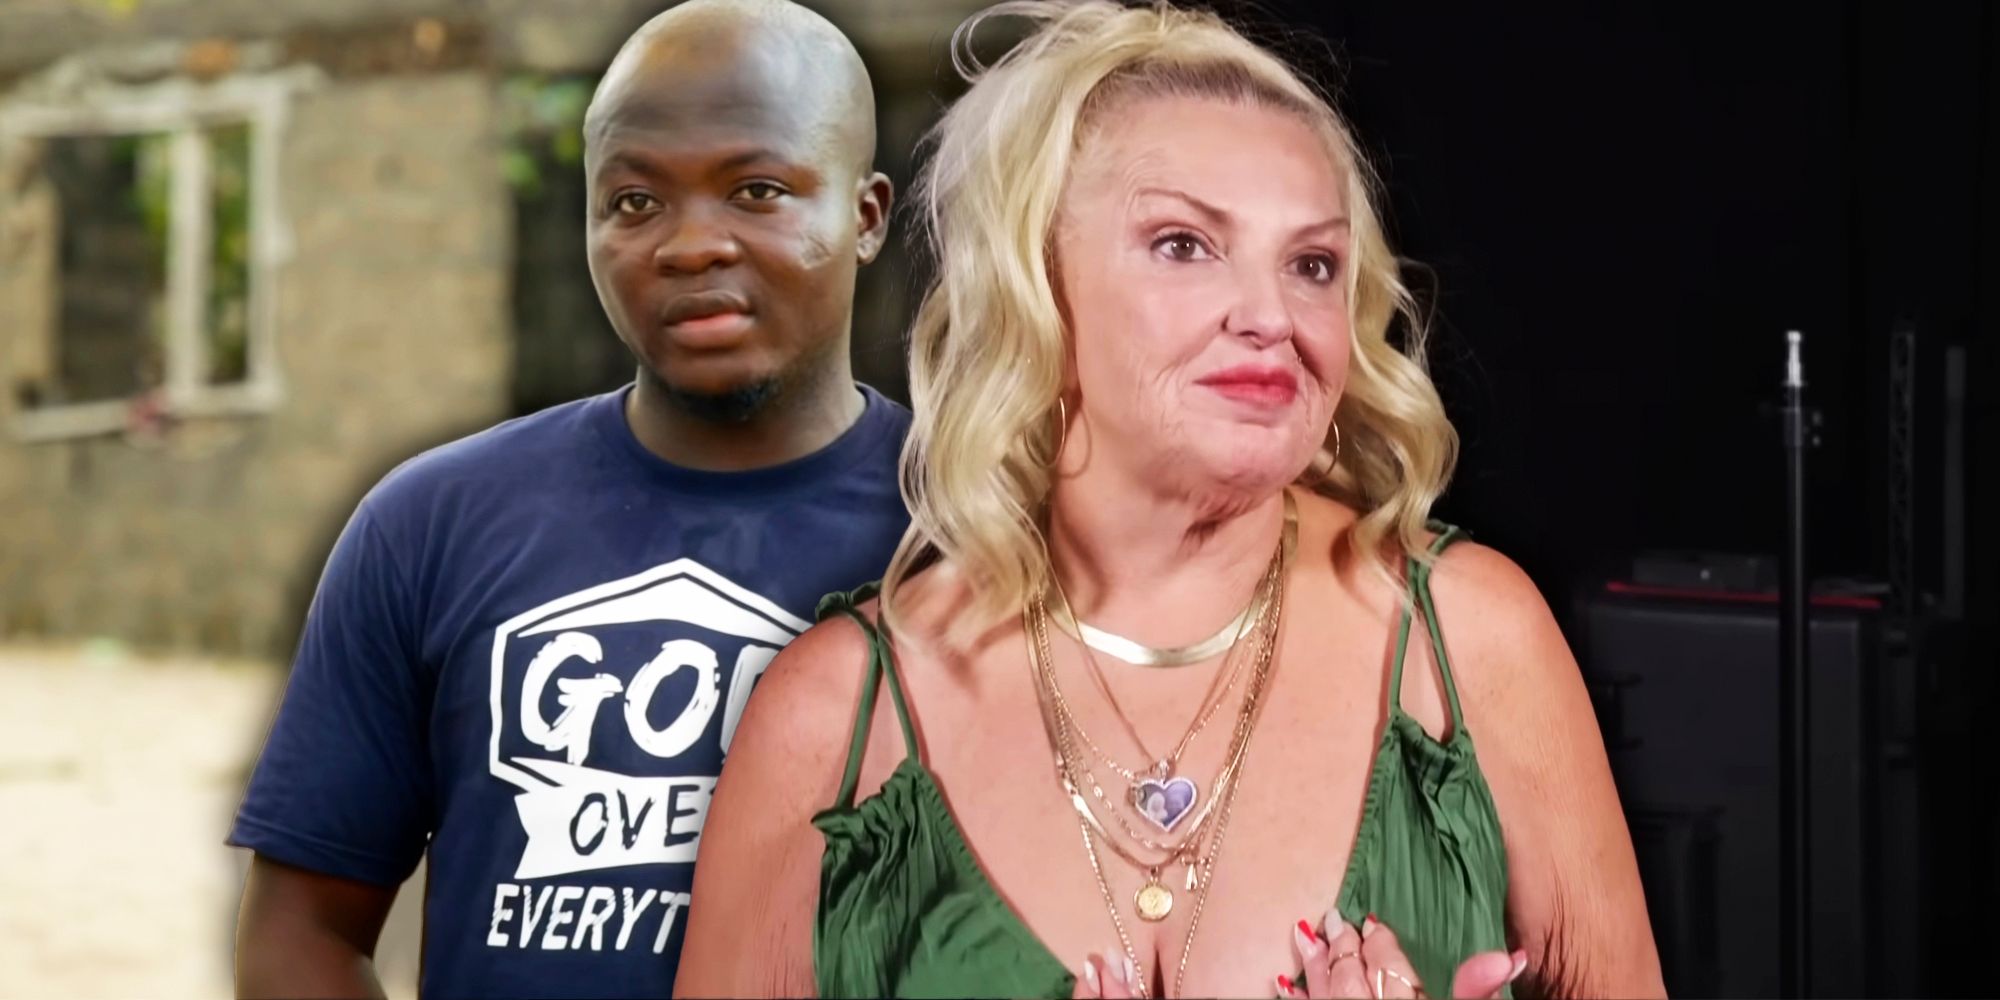 Montage of 90 Day Fiancé's Angela Deem in green dress looking smug and Michael Ilesanmi in blue t-shirt with worried expression